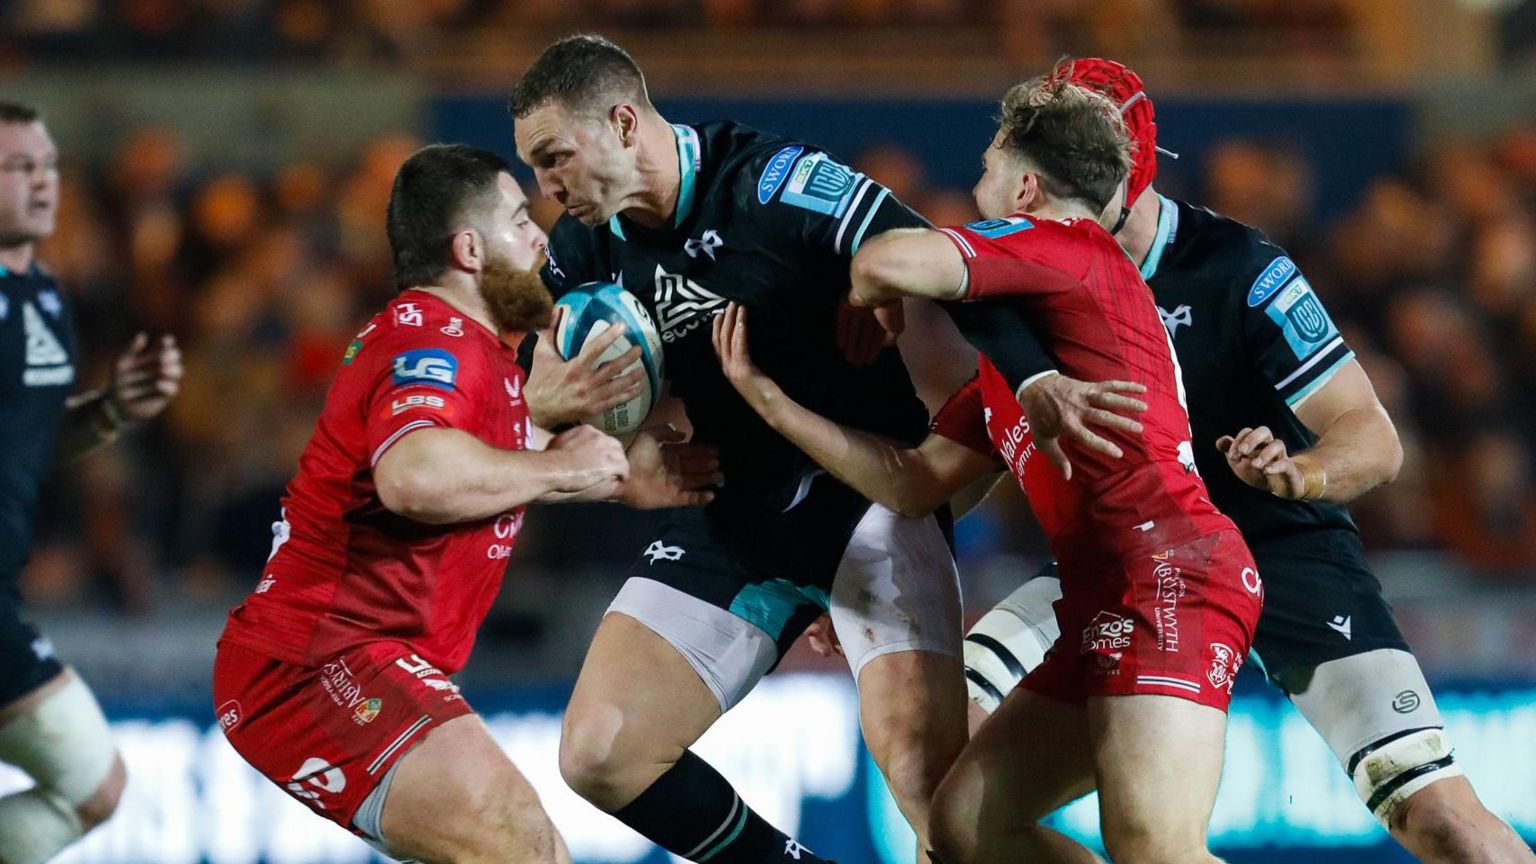 George North runs into Scarlets players